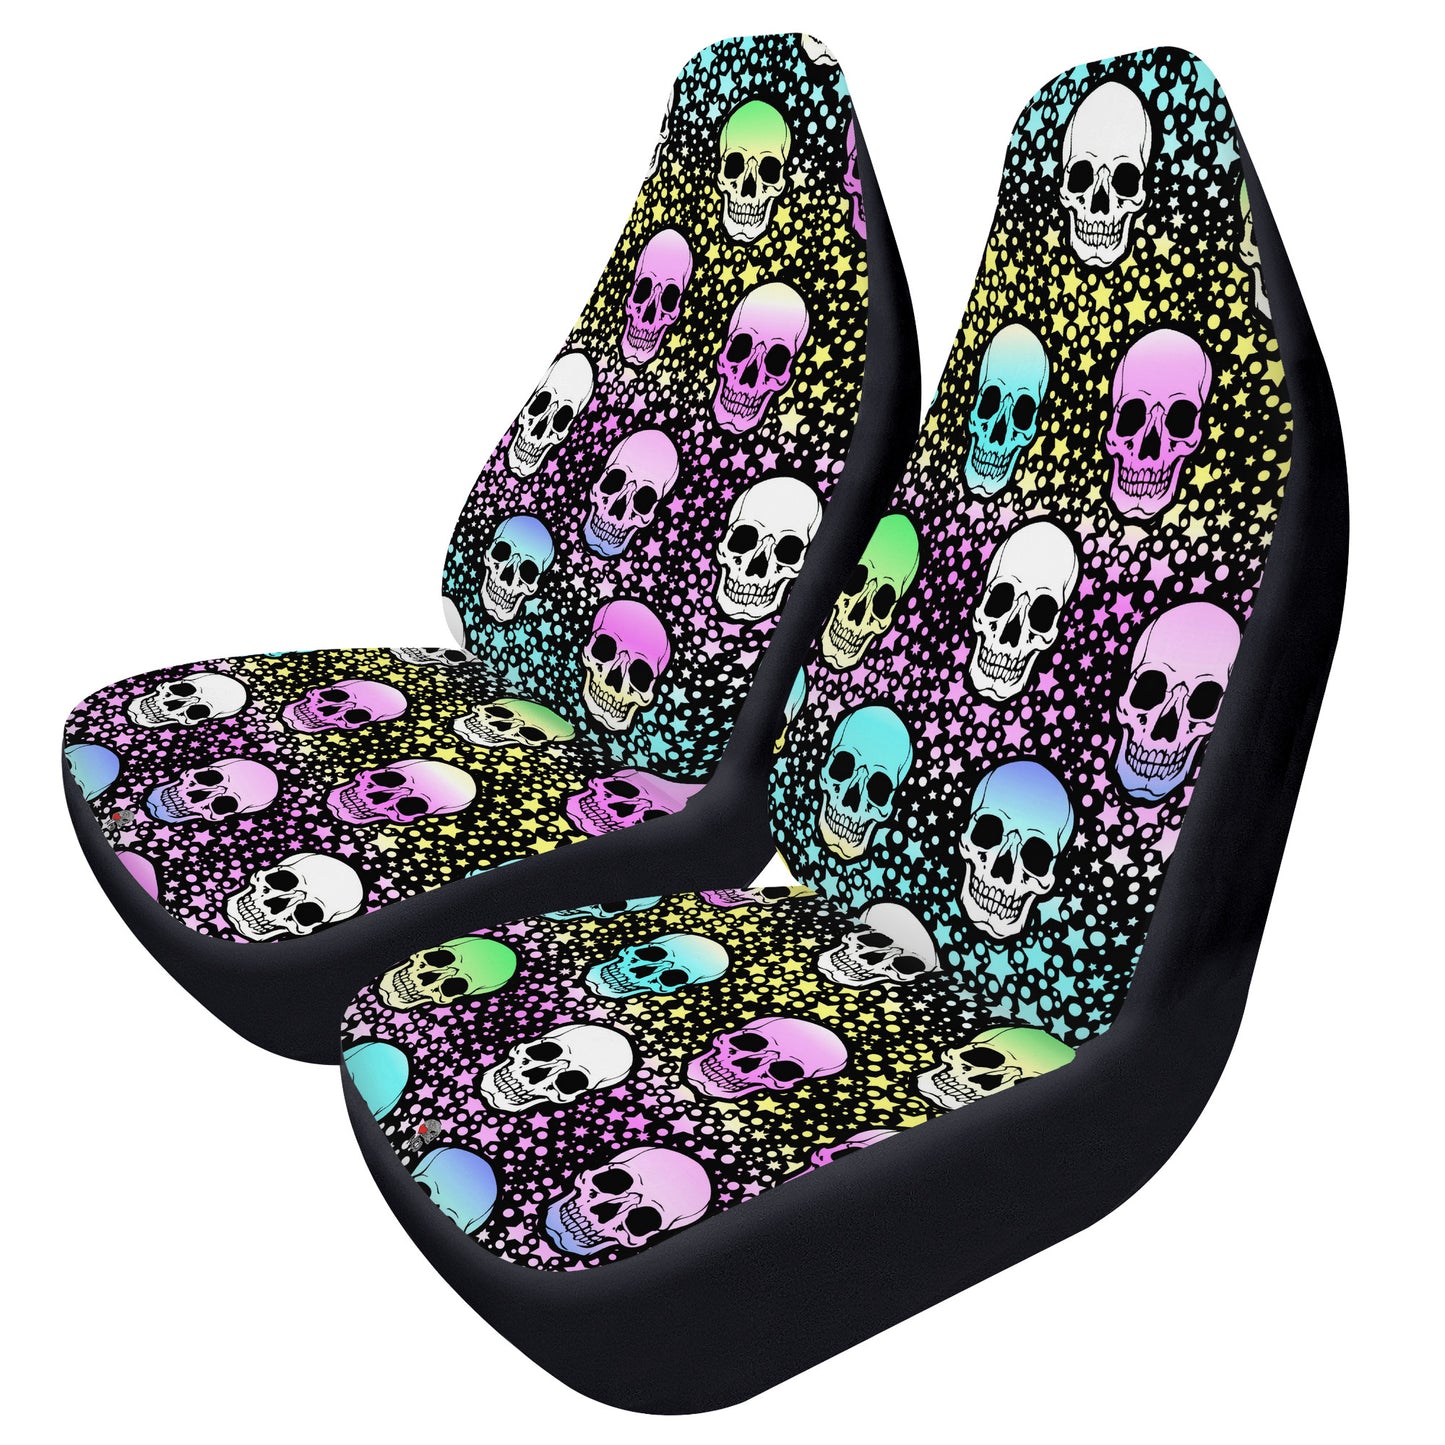 Pale Face Skulls Car Seat Covers